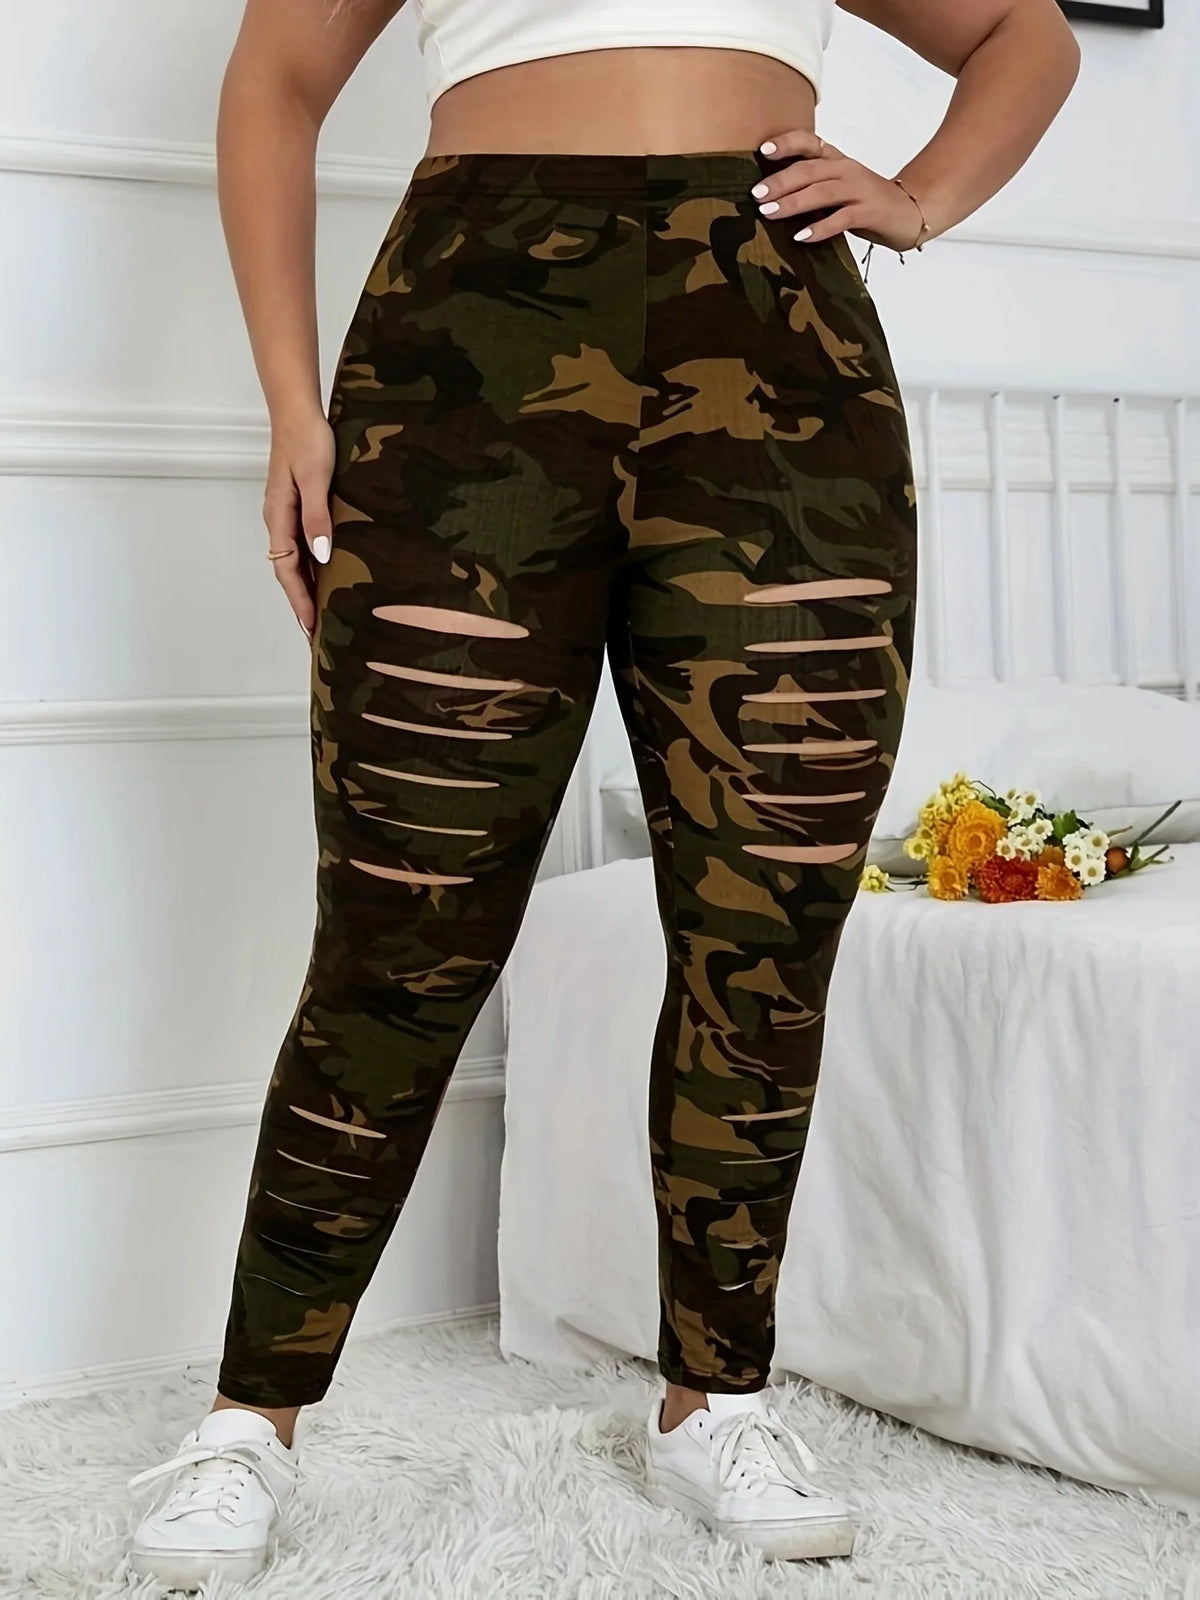 New Plus-Size Camouflage Print Ripped Leggings for Women - Army Green Front Ripped Pants